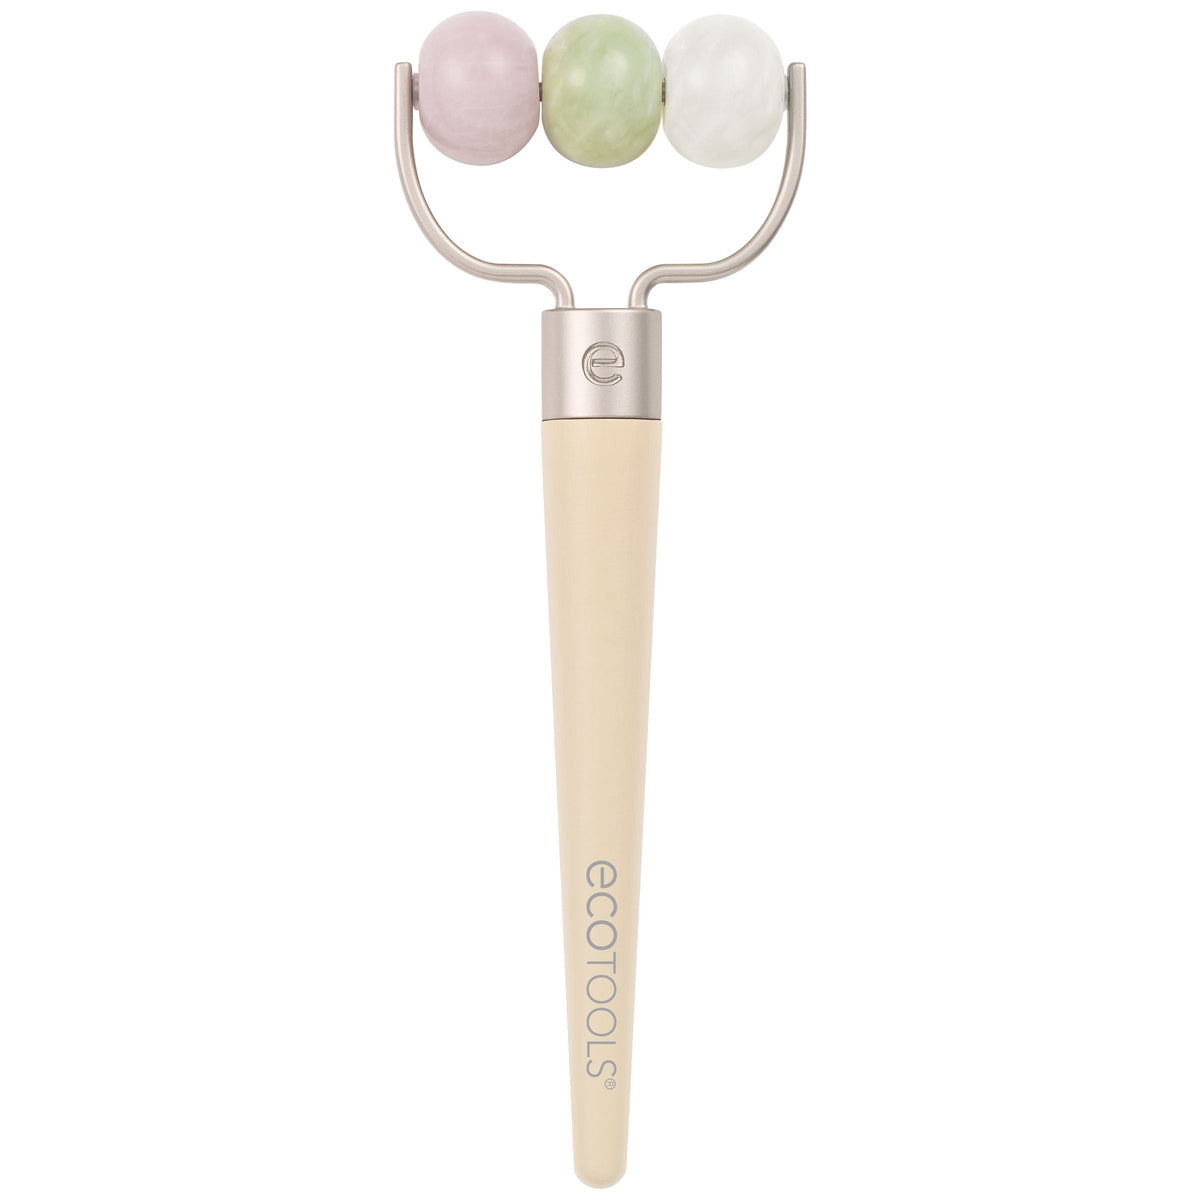 EcoTools Multi Stone Body Roller, For Massaging & Smoothing, Rose 